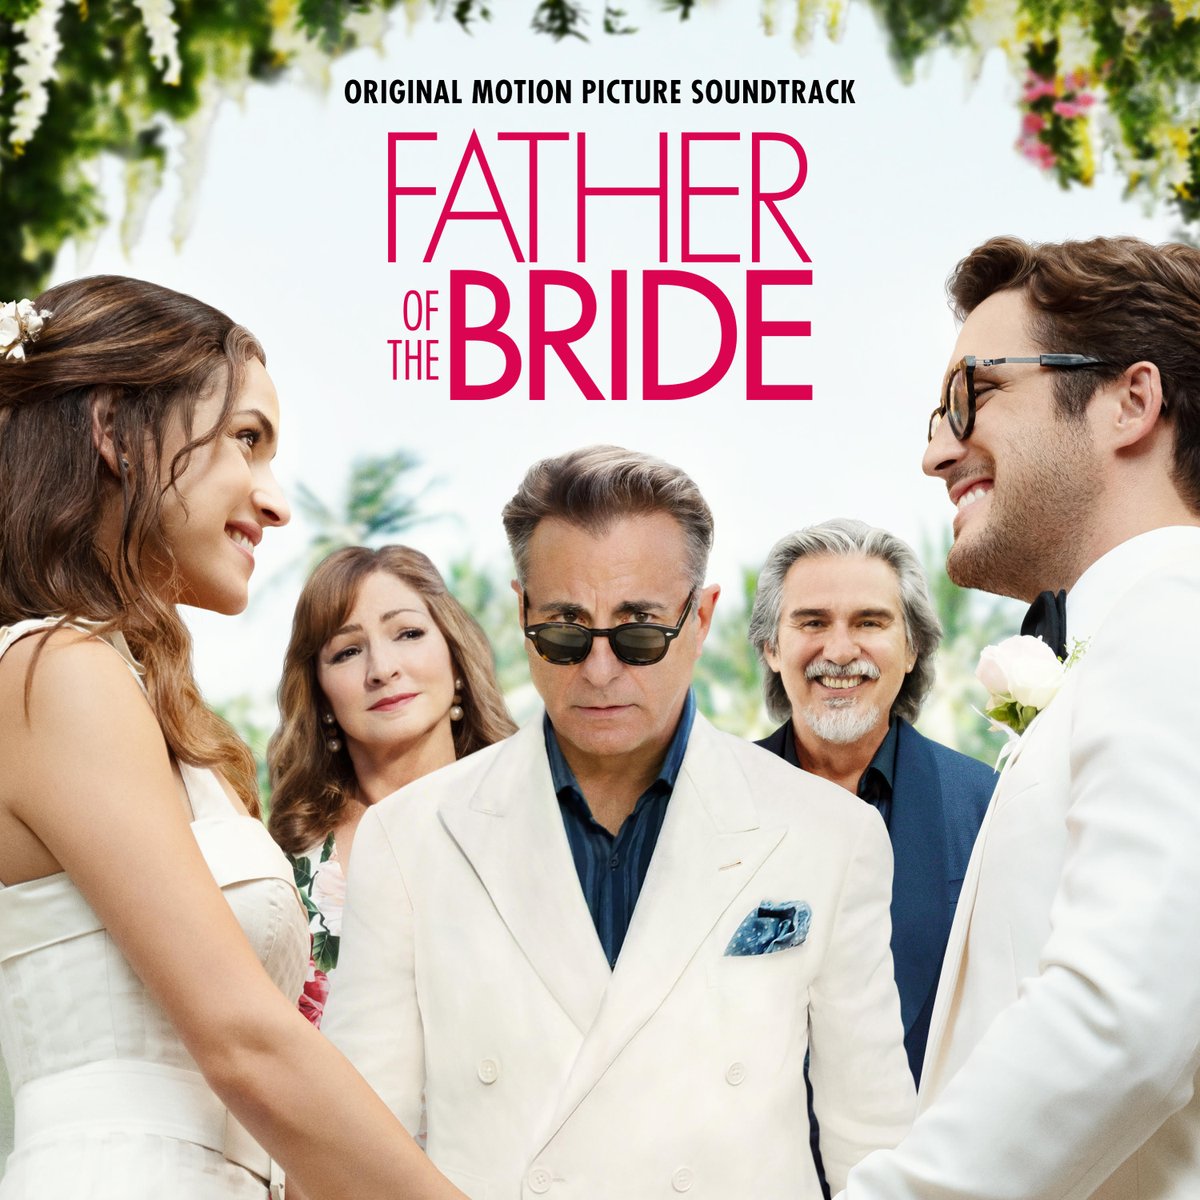 Hey! @hbomax newly released #FatherofTheBride soundtrack is now available to stream! Give it a listen and let me know what you think lnk.to/FatherOfTheBri…